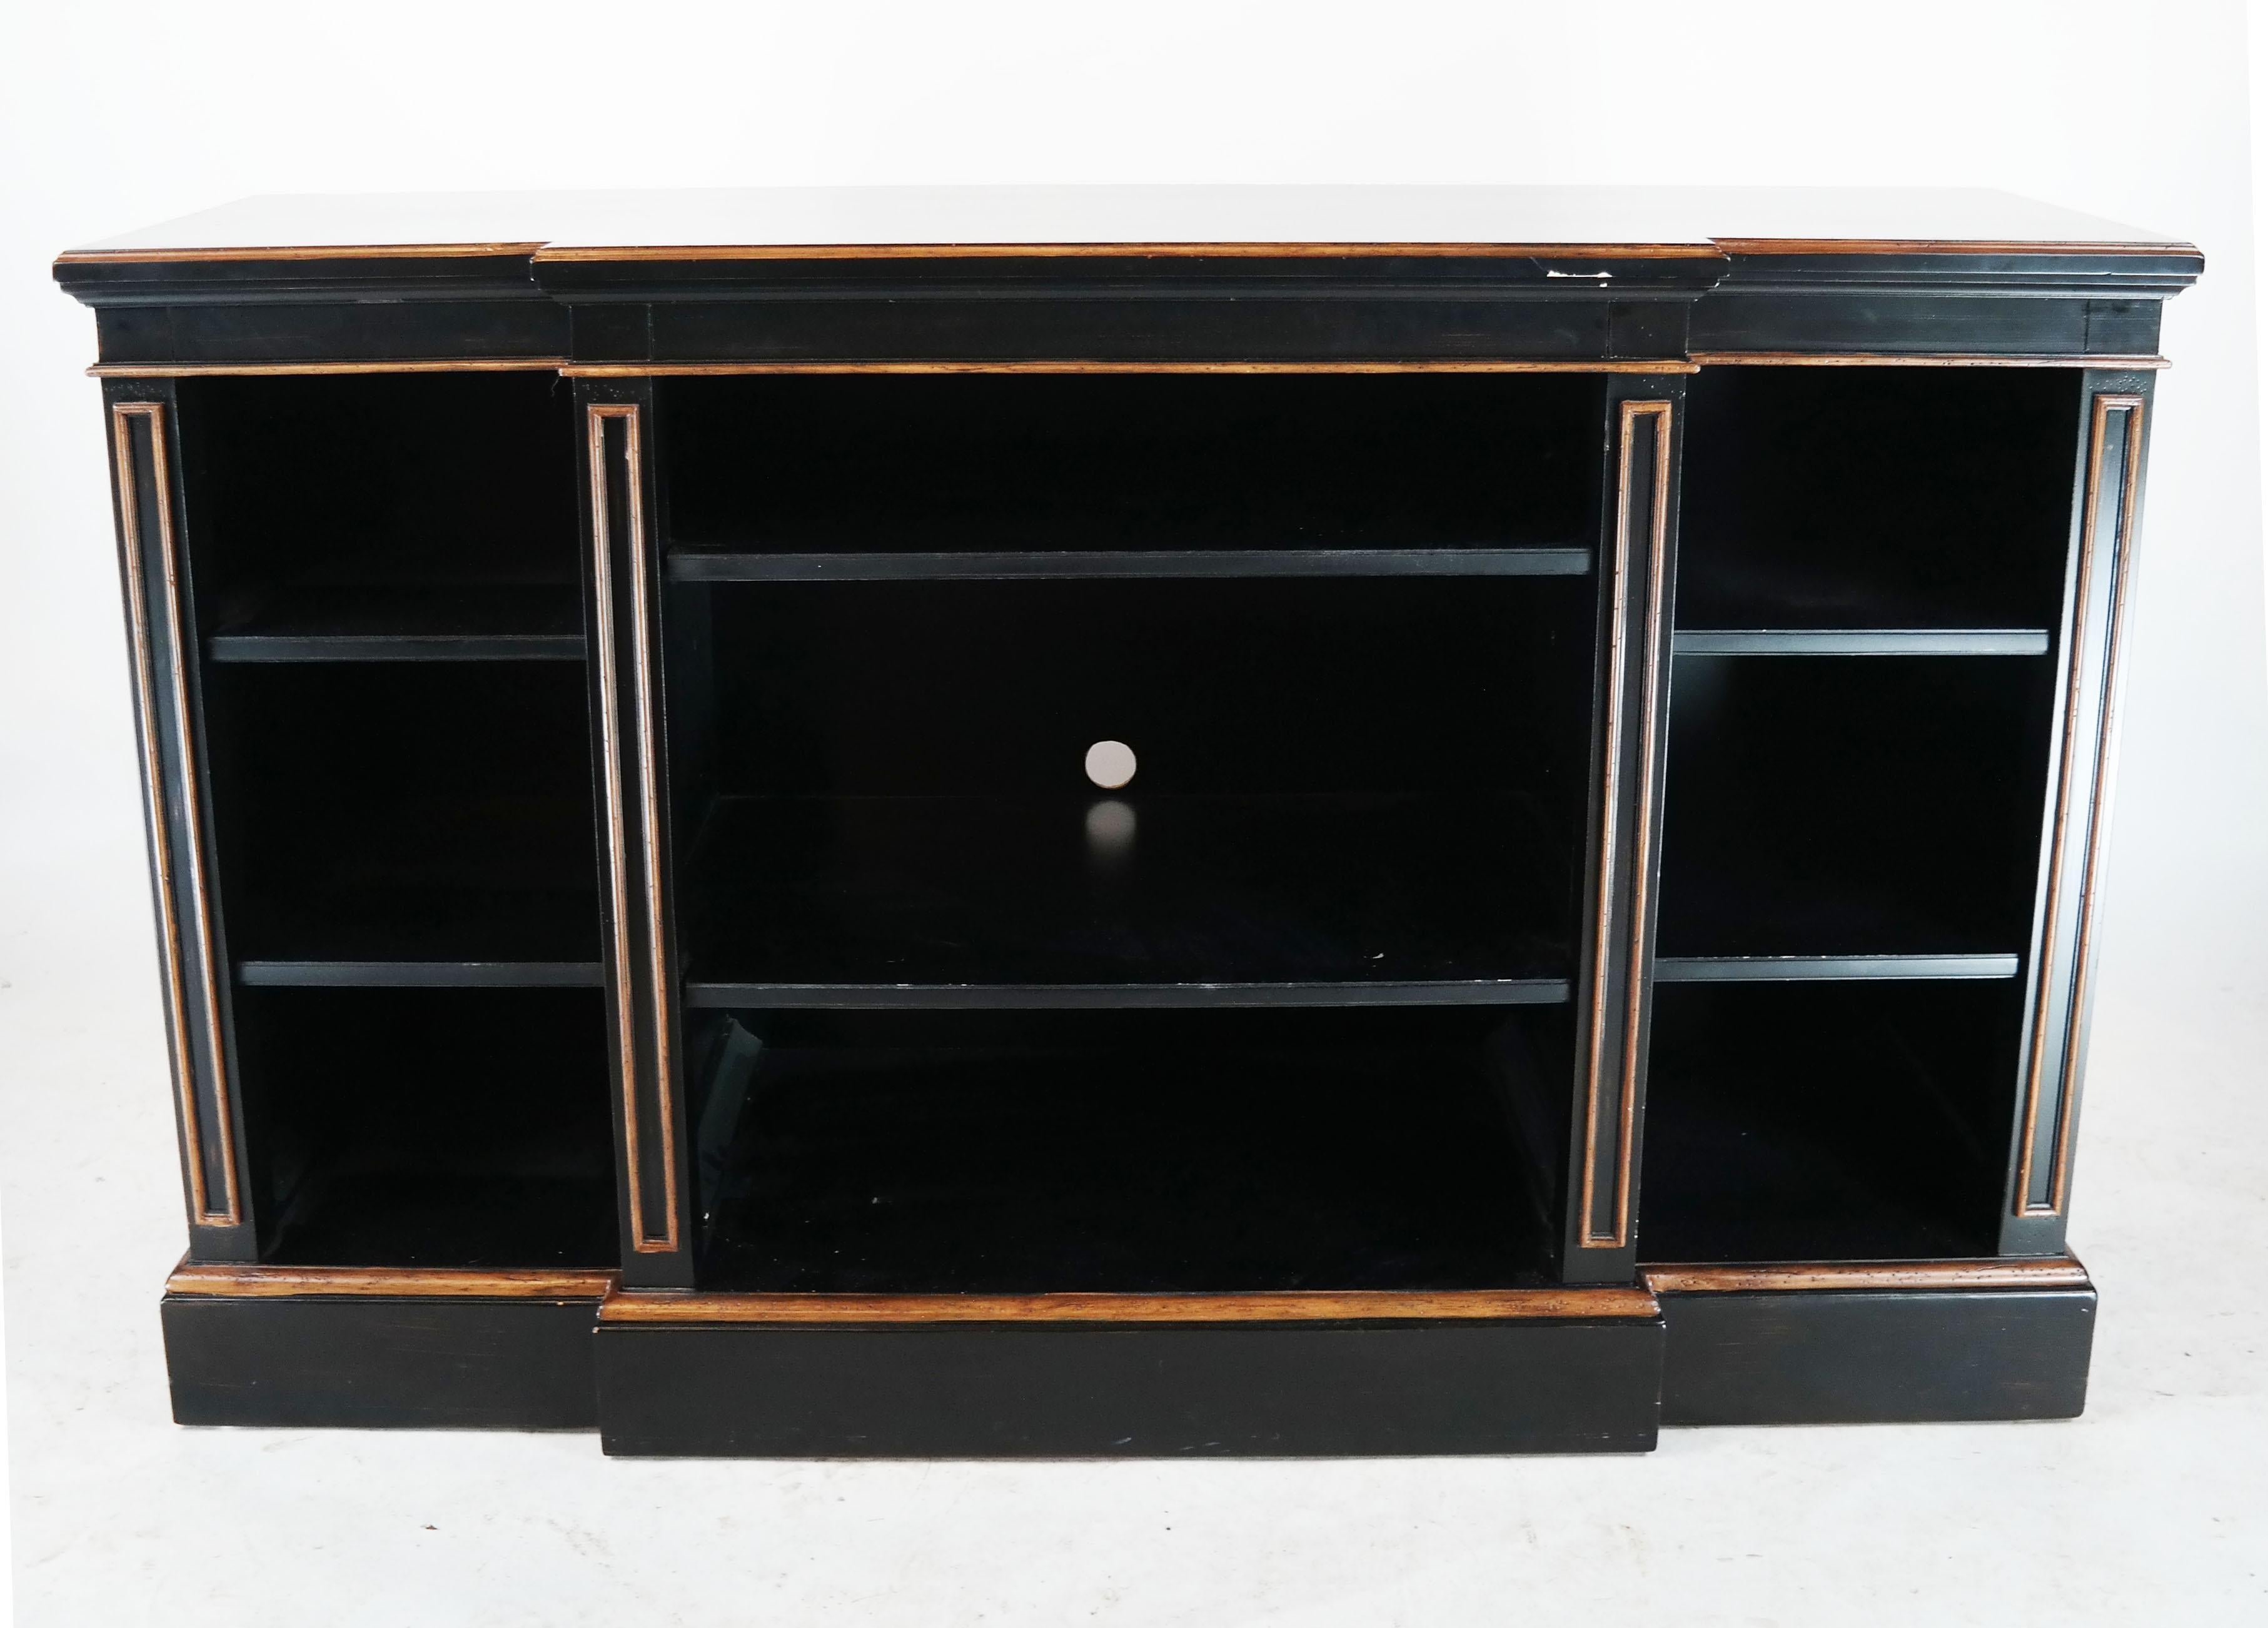 Regency ebonized bookcase with gilt detail. Three sections with two adjustable shelves. Great as a media cabinet.